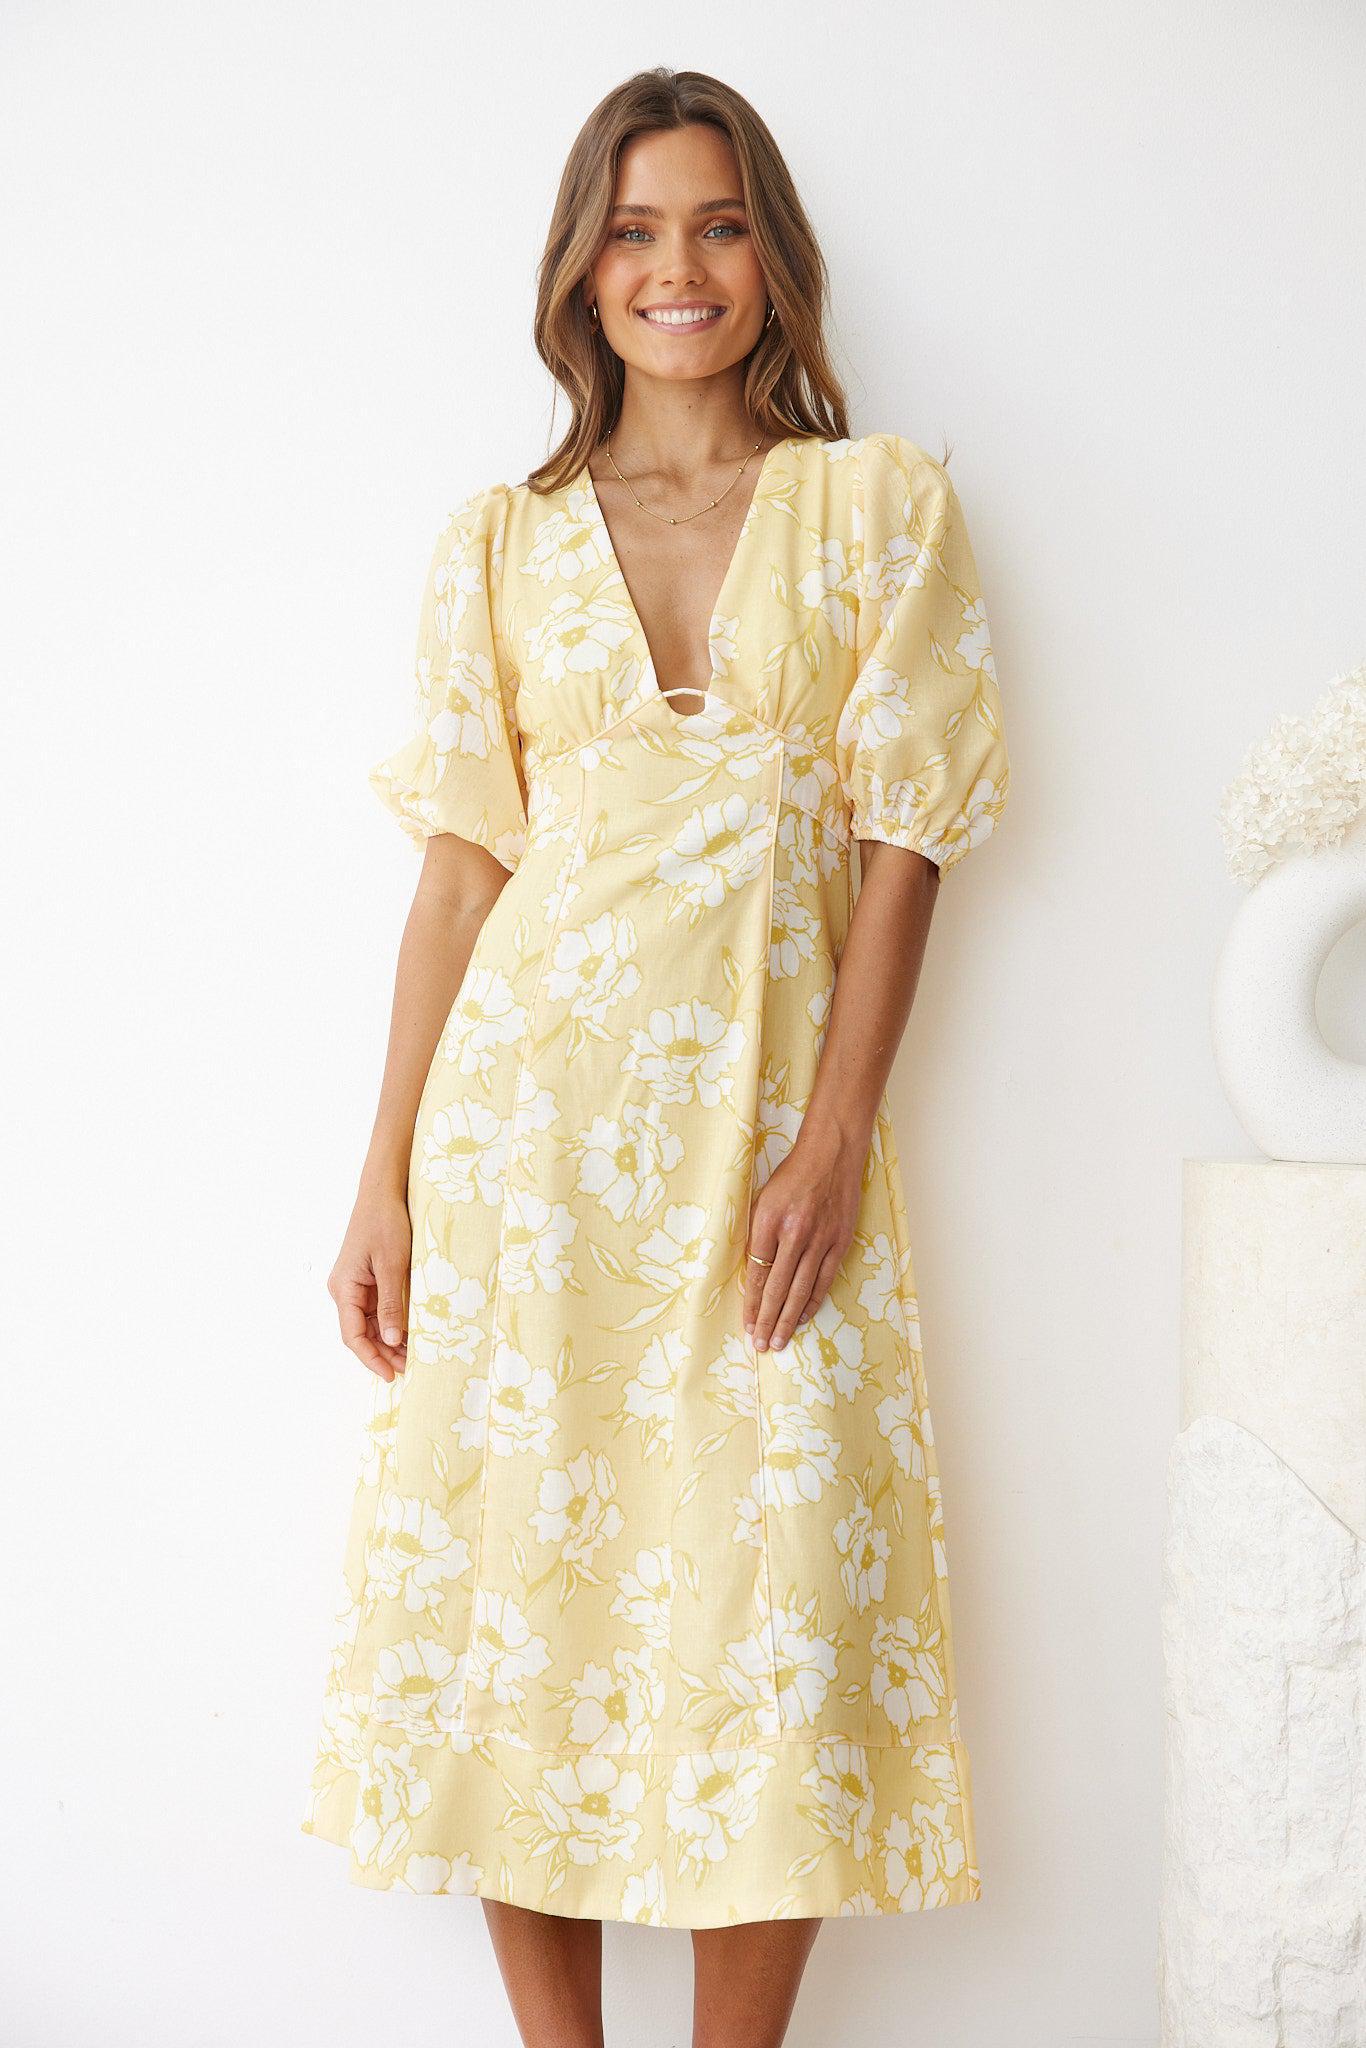 Image of Suzanna Dress - Yellow Floral